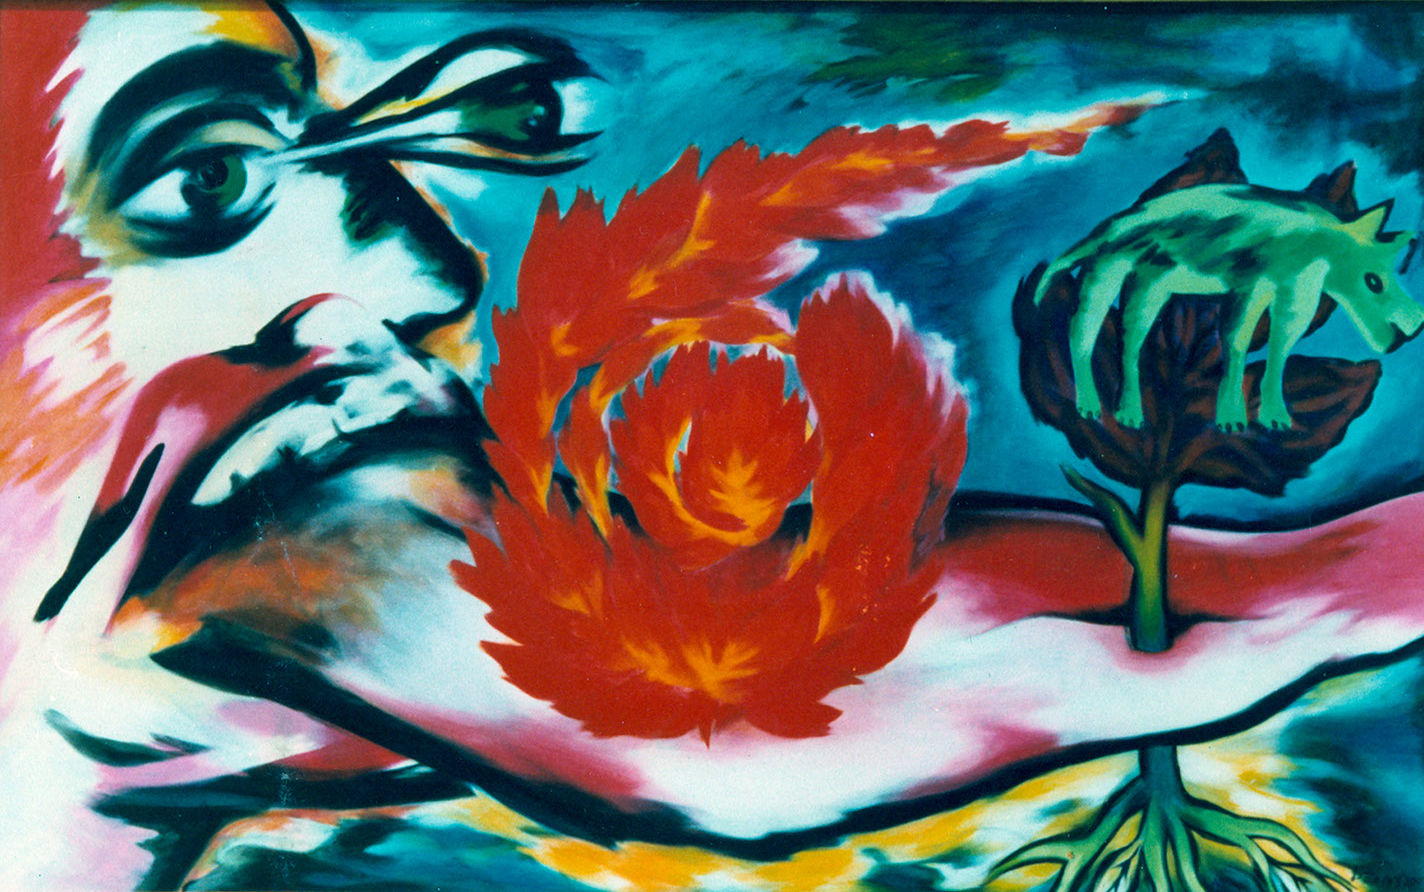 Title: Logos (Painting) 5
Materials: Acrylic
Size: 120x200 cm
Year: 1984